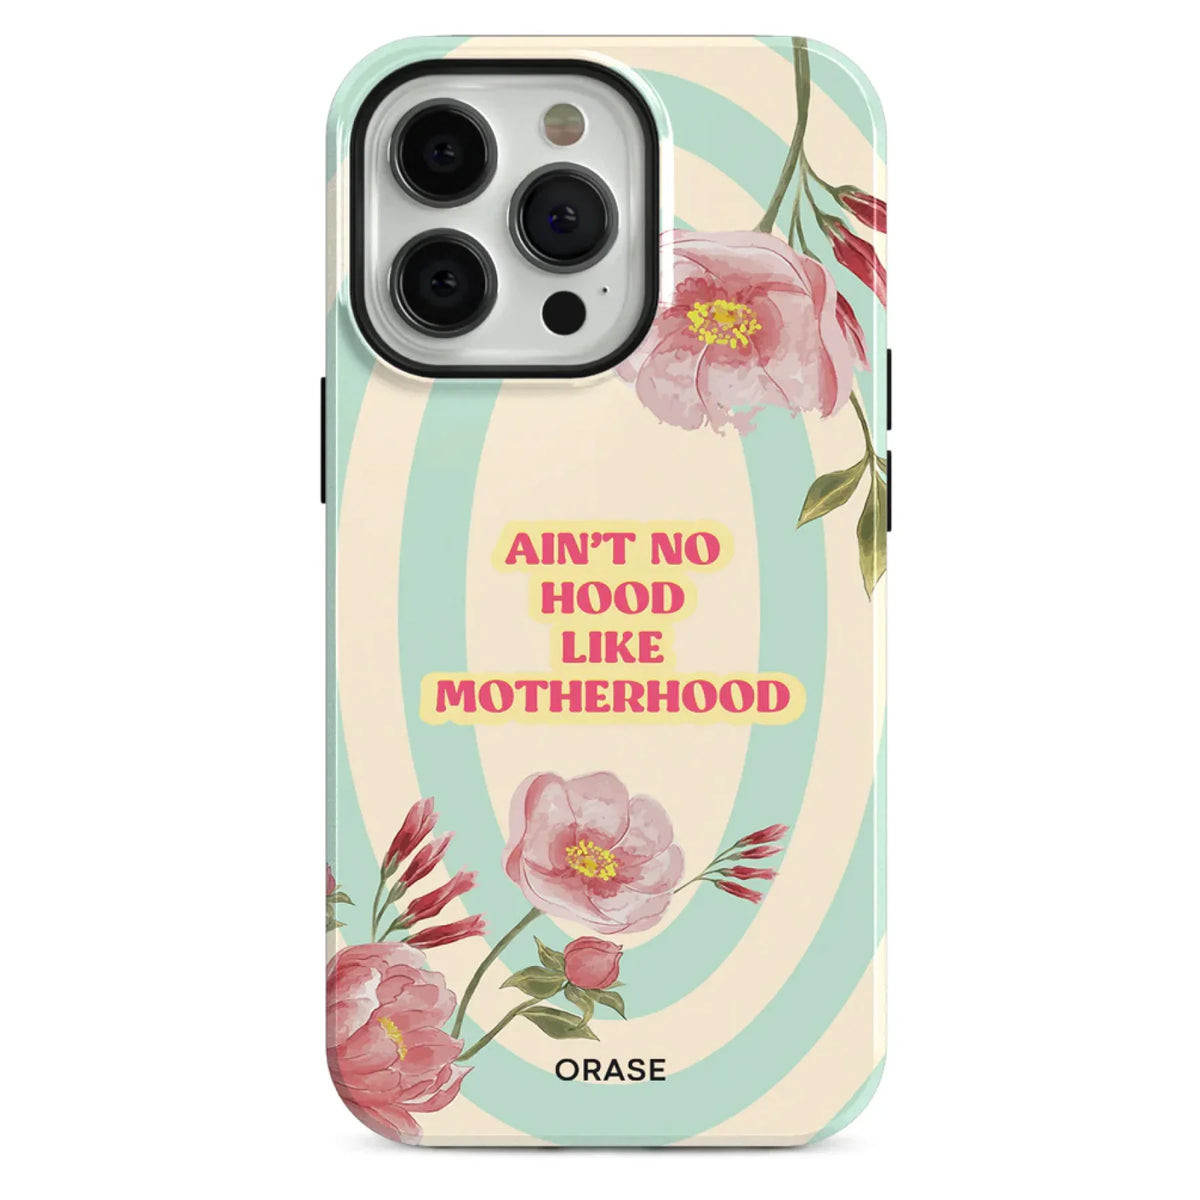 Ain't No Hood iPhone Case - iPhone 12 Pro